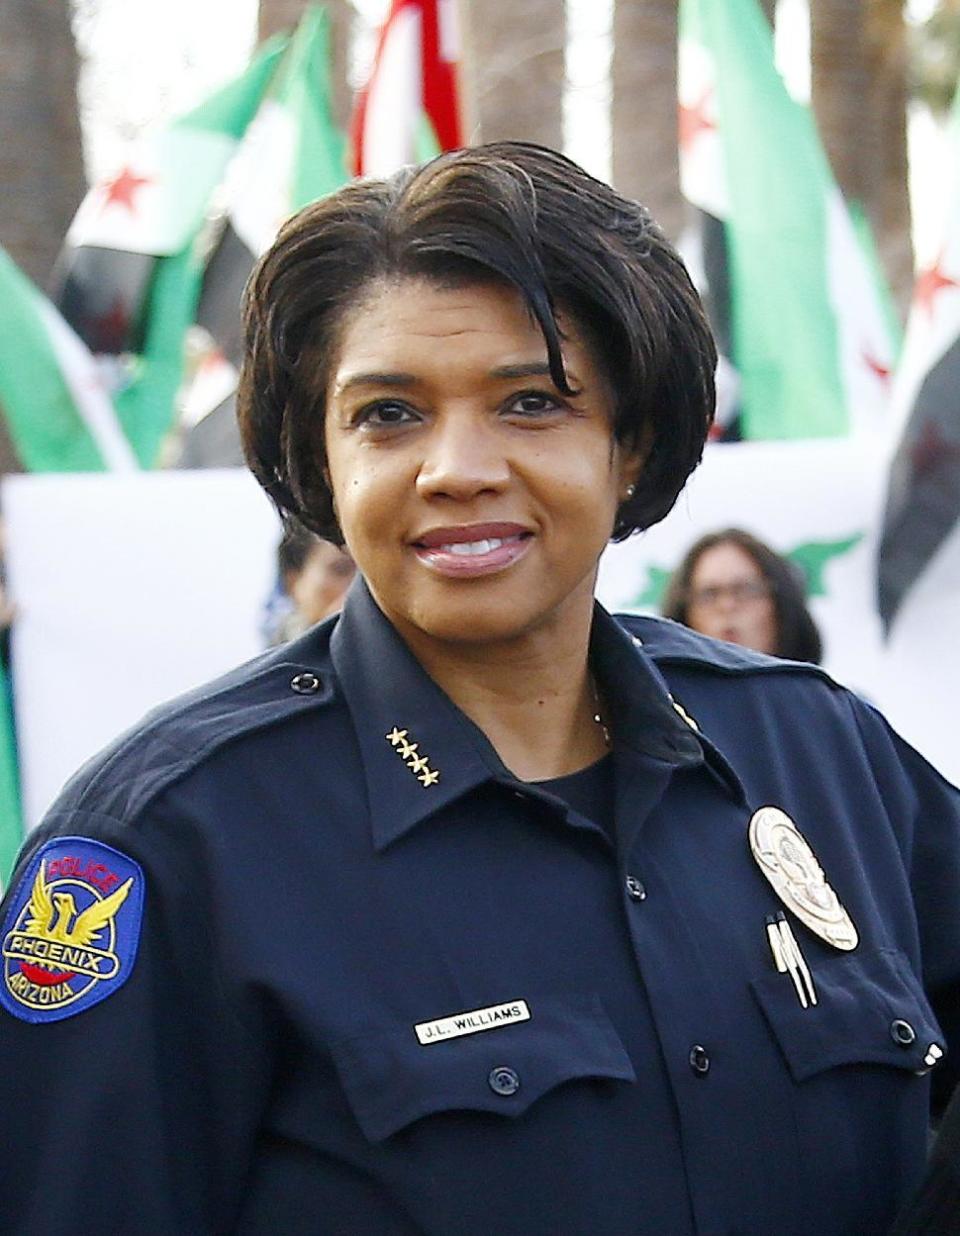 In this Jan. 16, 2017 photo, Phoenix Police Chief Jeri Williams poses for a photograph with other city leaders prior to leading a Martin Luther King Jr. Day march in Phoenix. Williams is among the growing number of women heading departments, many in need of image makeovers. (AP Photo/Ross D. Franklin)